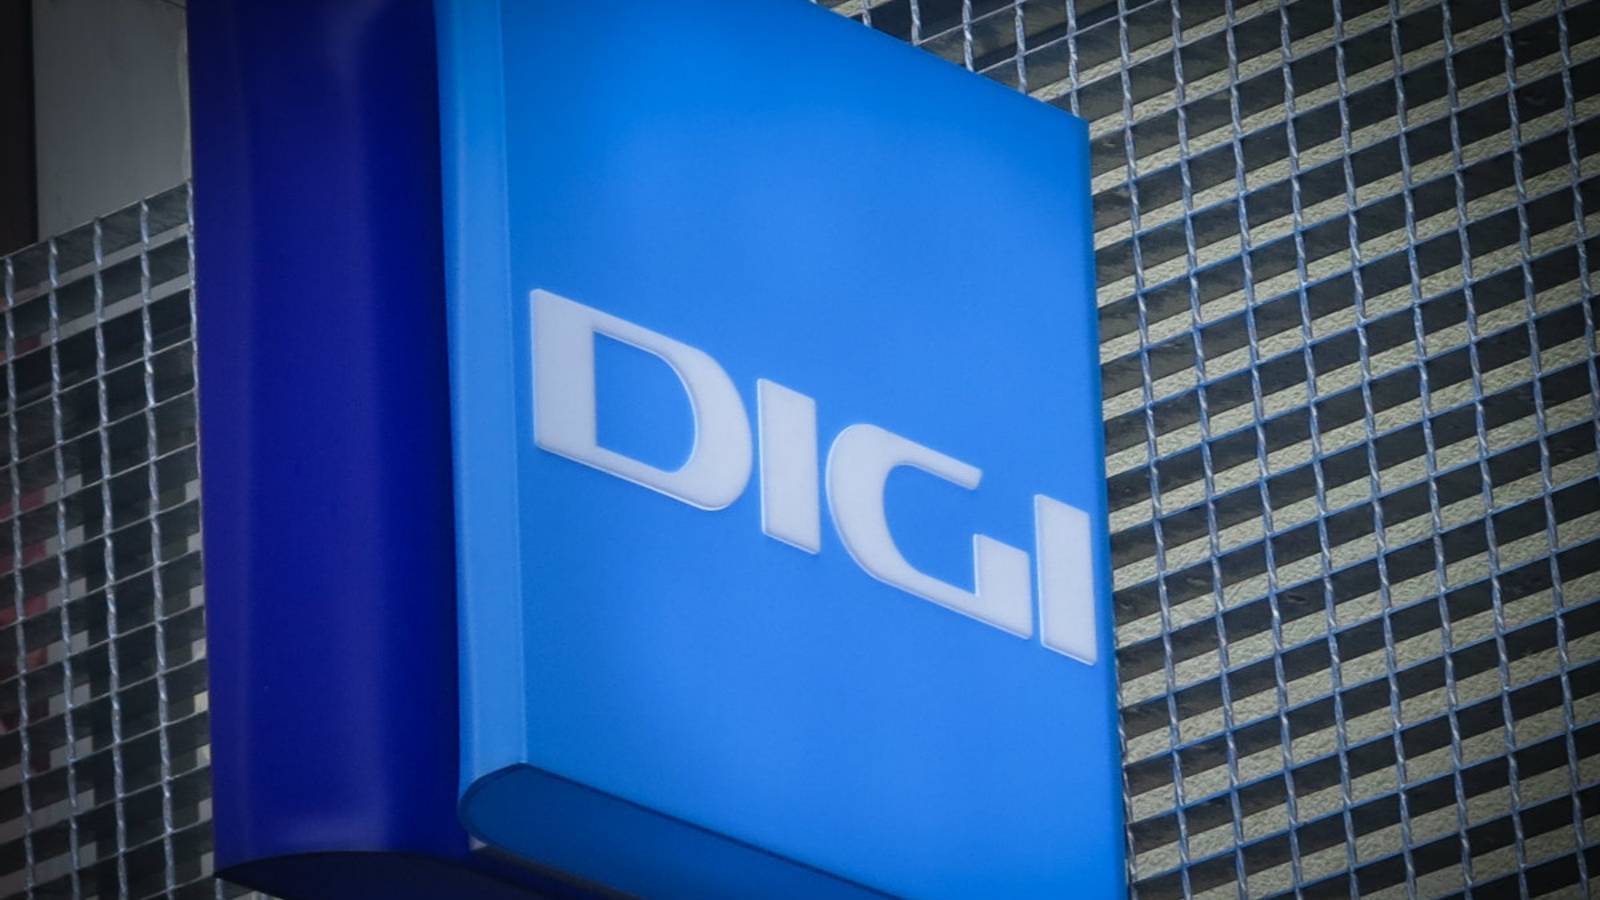 DIGI Mobile Official Measure Announced to Customers Starting 2022